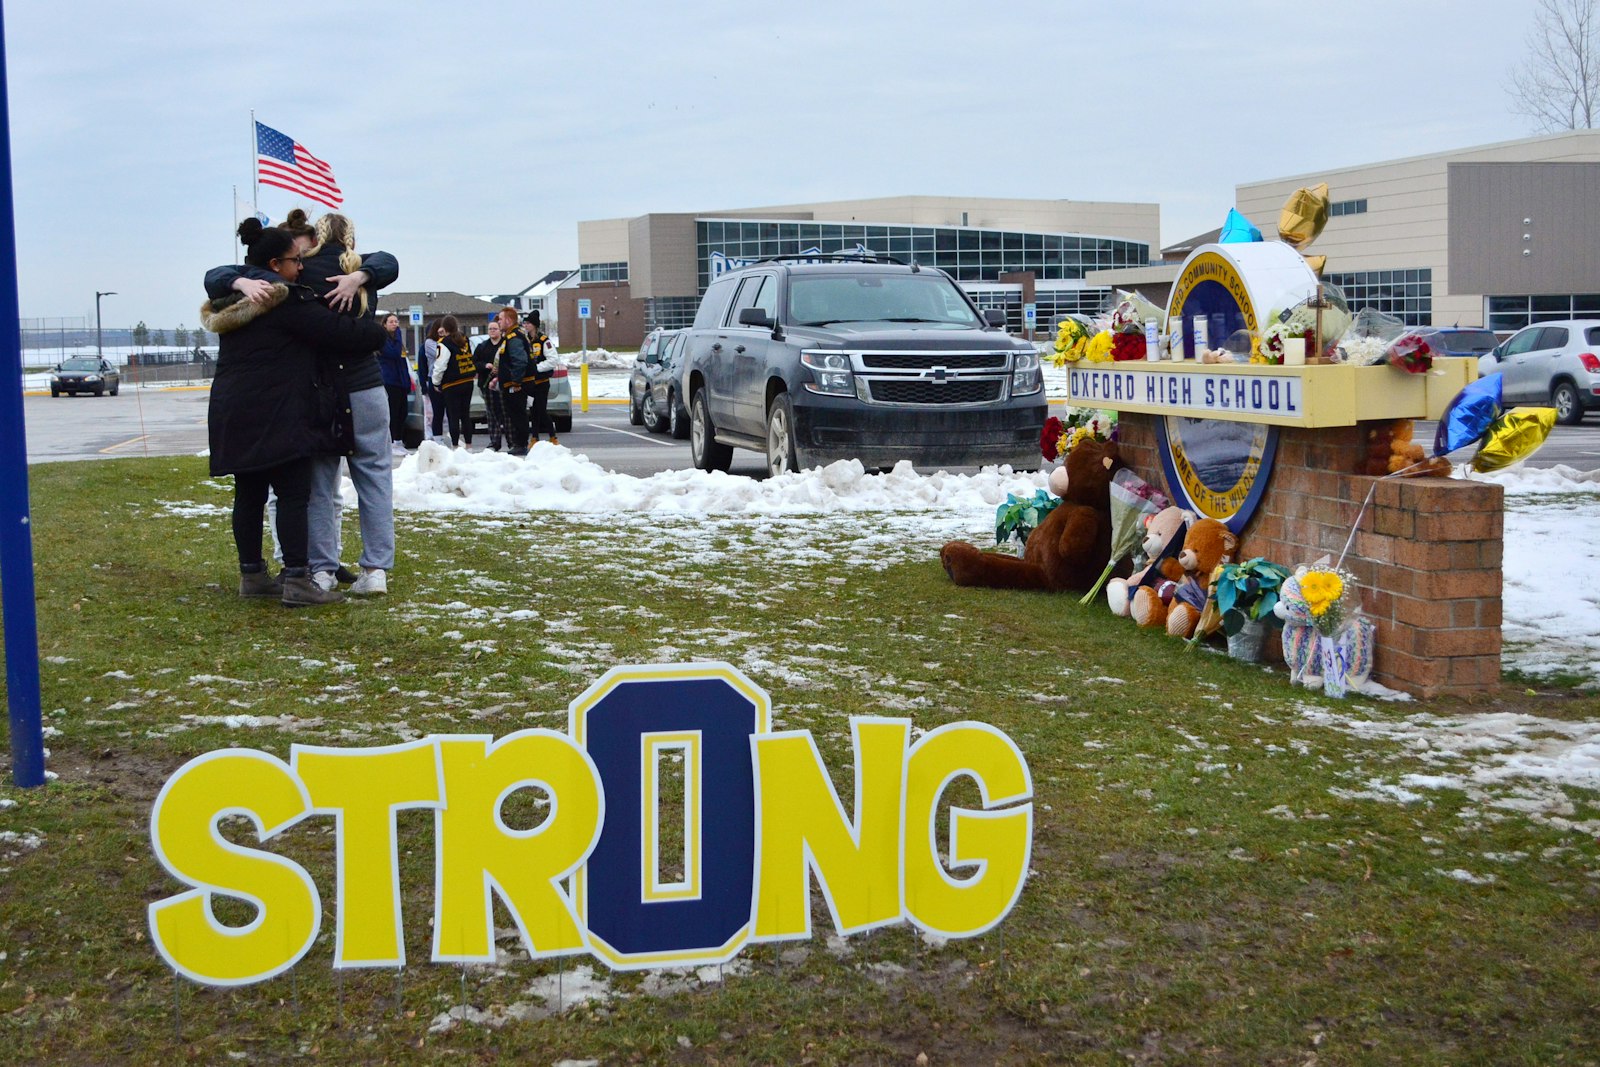 Students embrace one another outside Oxford High School on Dec. 1 as authorities continued the investigation. Across Oxford and neighboring Lake Orion, community members posted signs of support and continued their prayers for the victims.